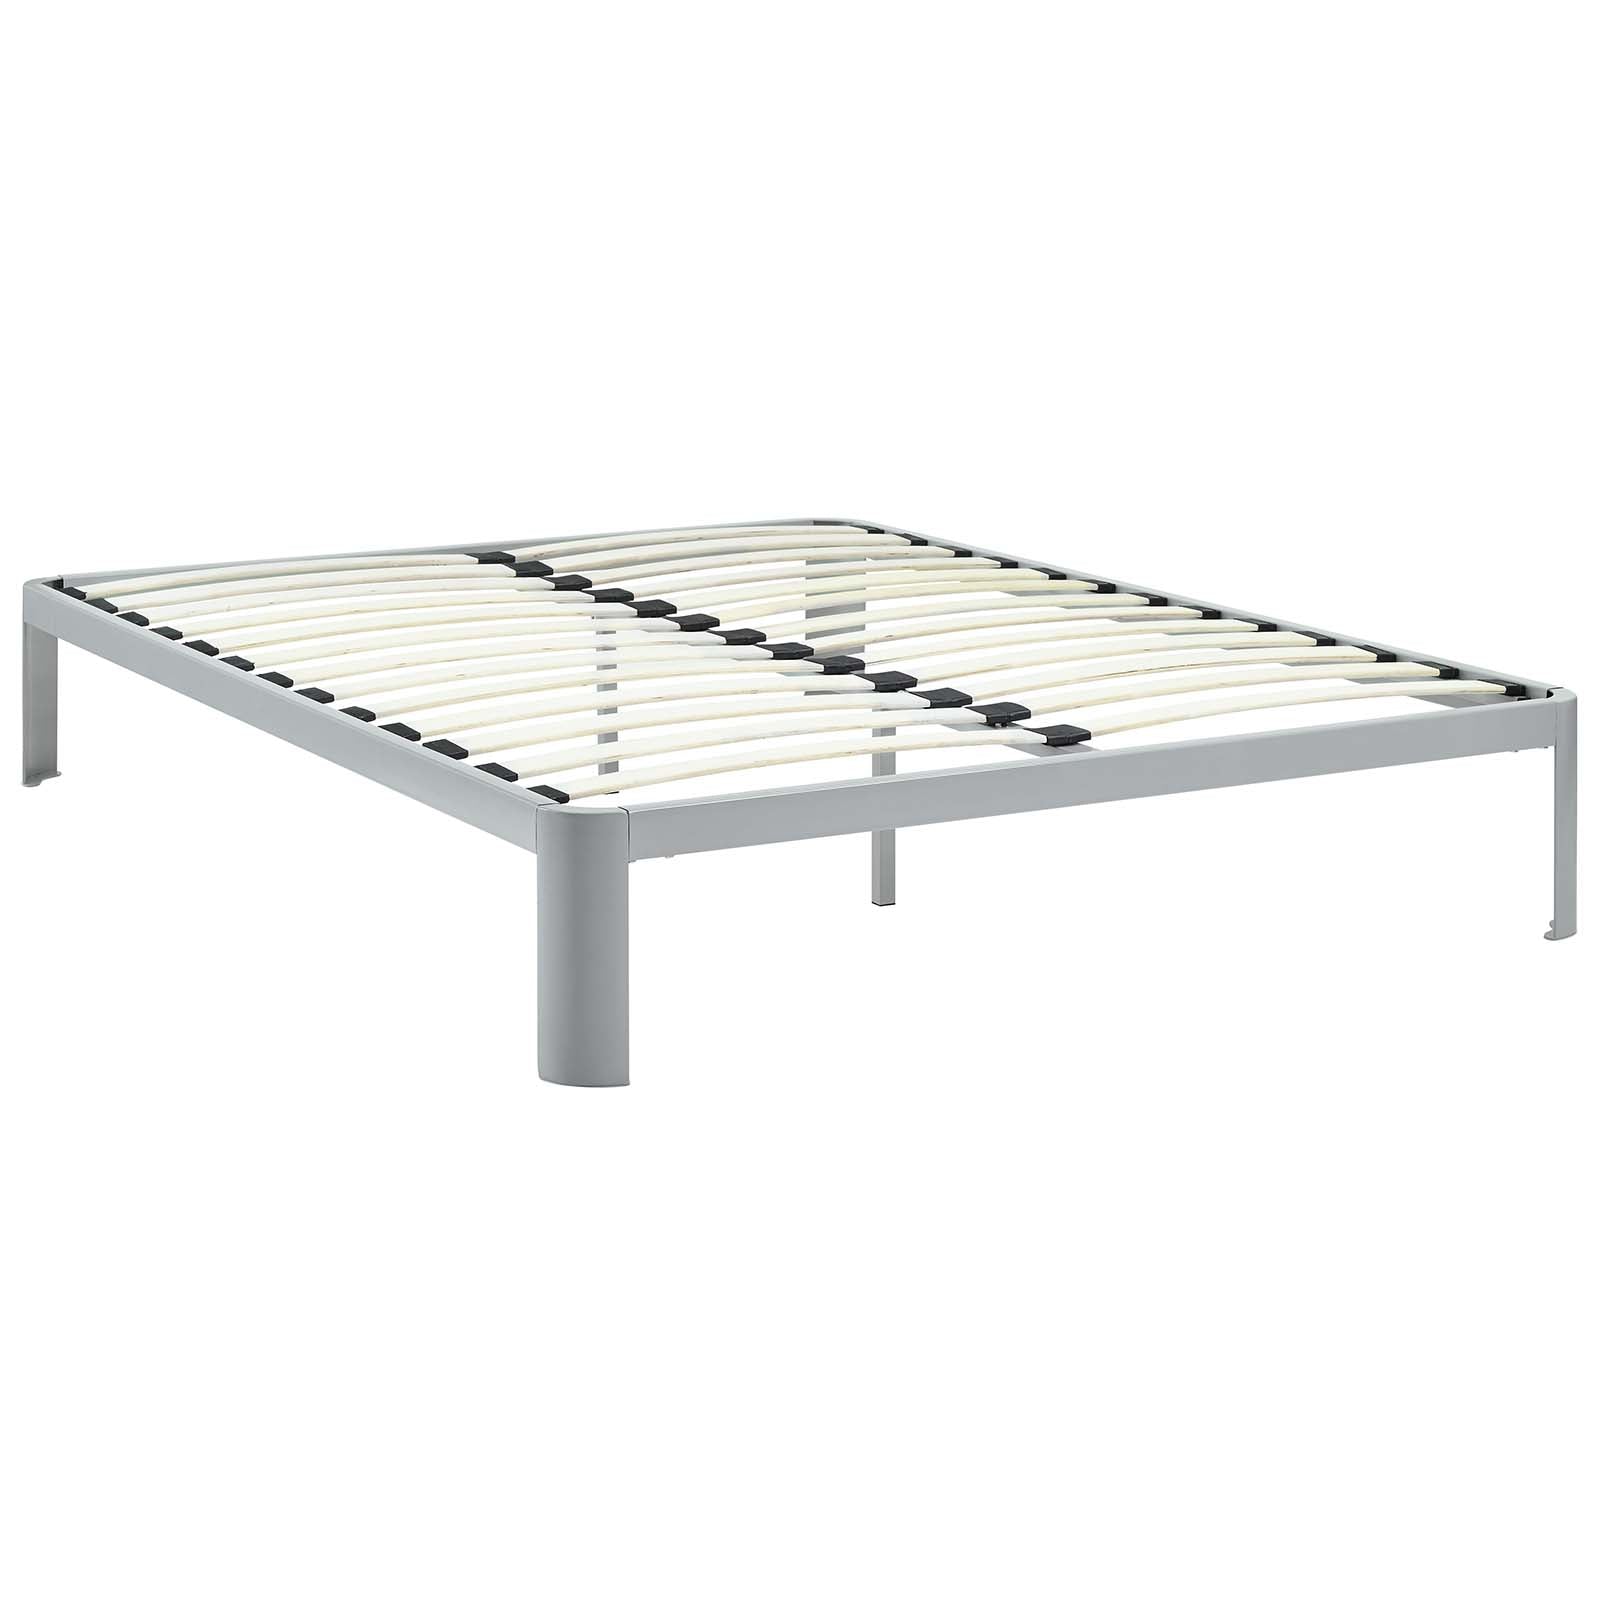 Modway Beds - Corinne Queen Bed Frame Gray